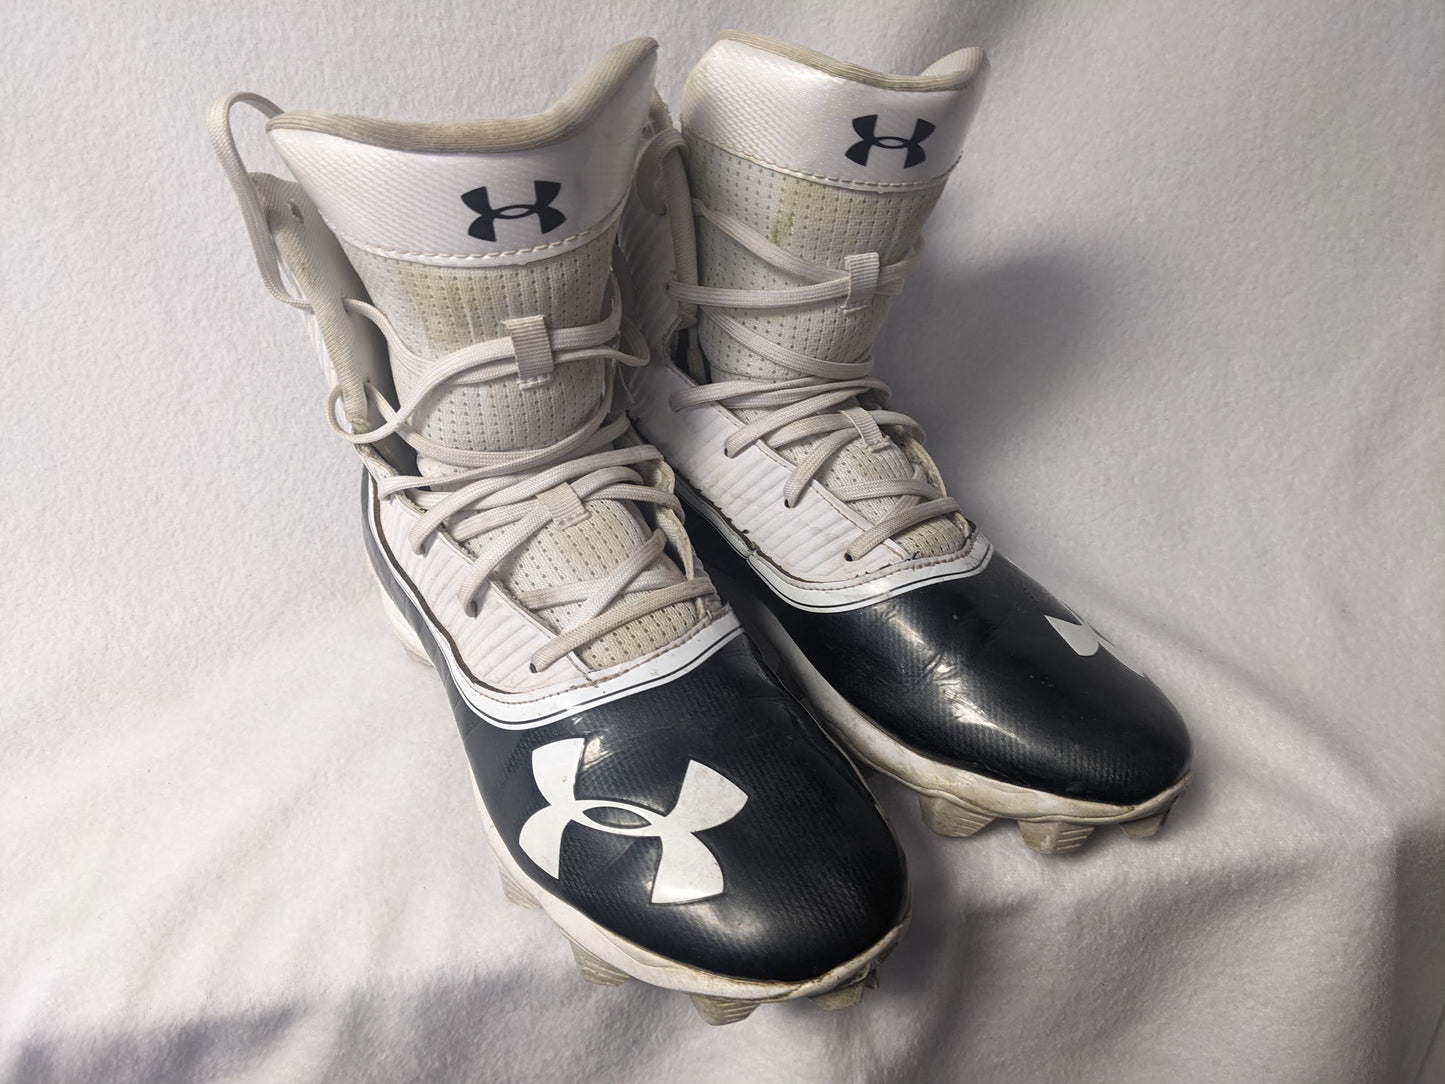 Under Armour Highlight Football Cleats Size 8 Color Black Condition Used